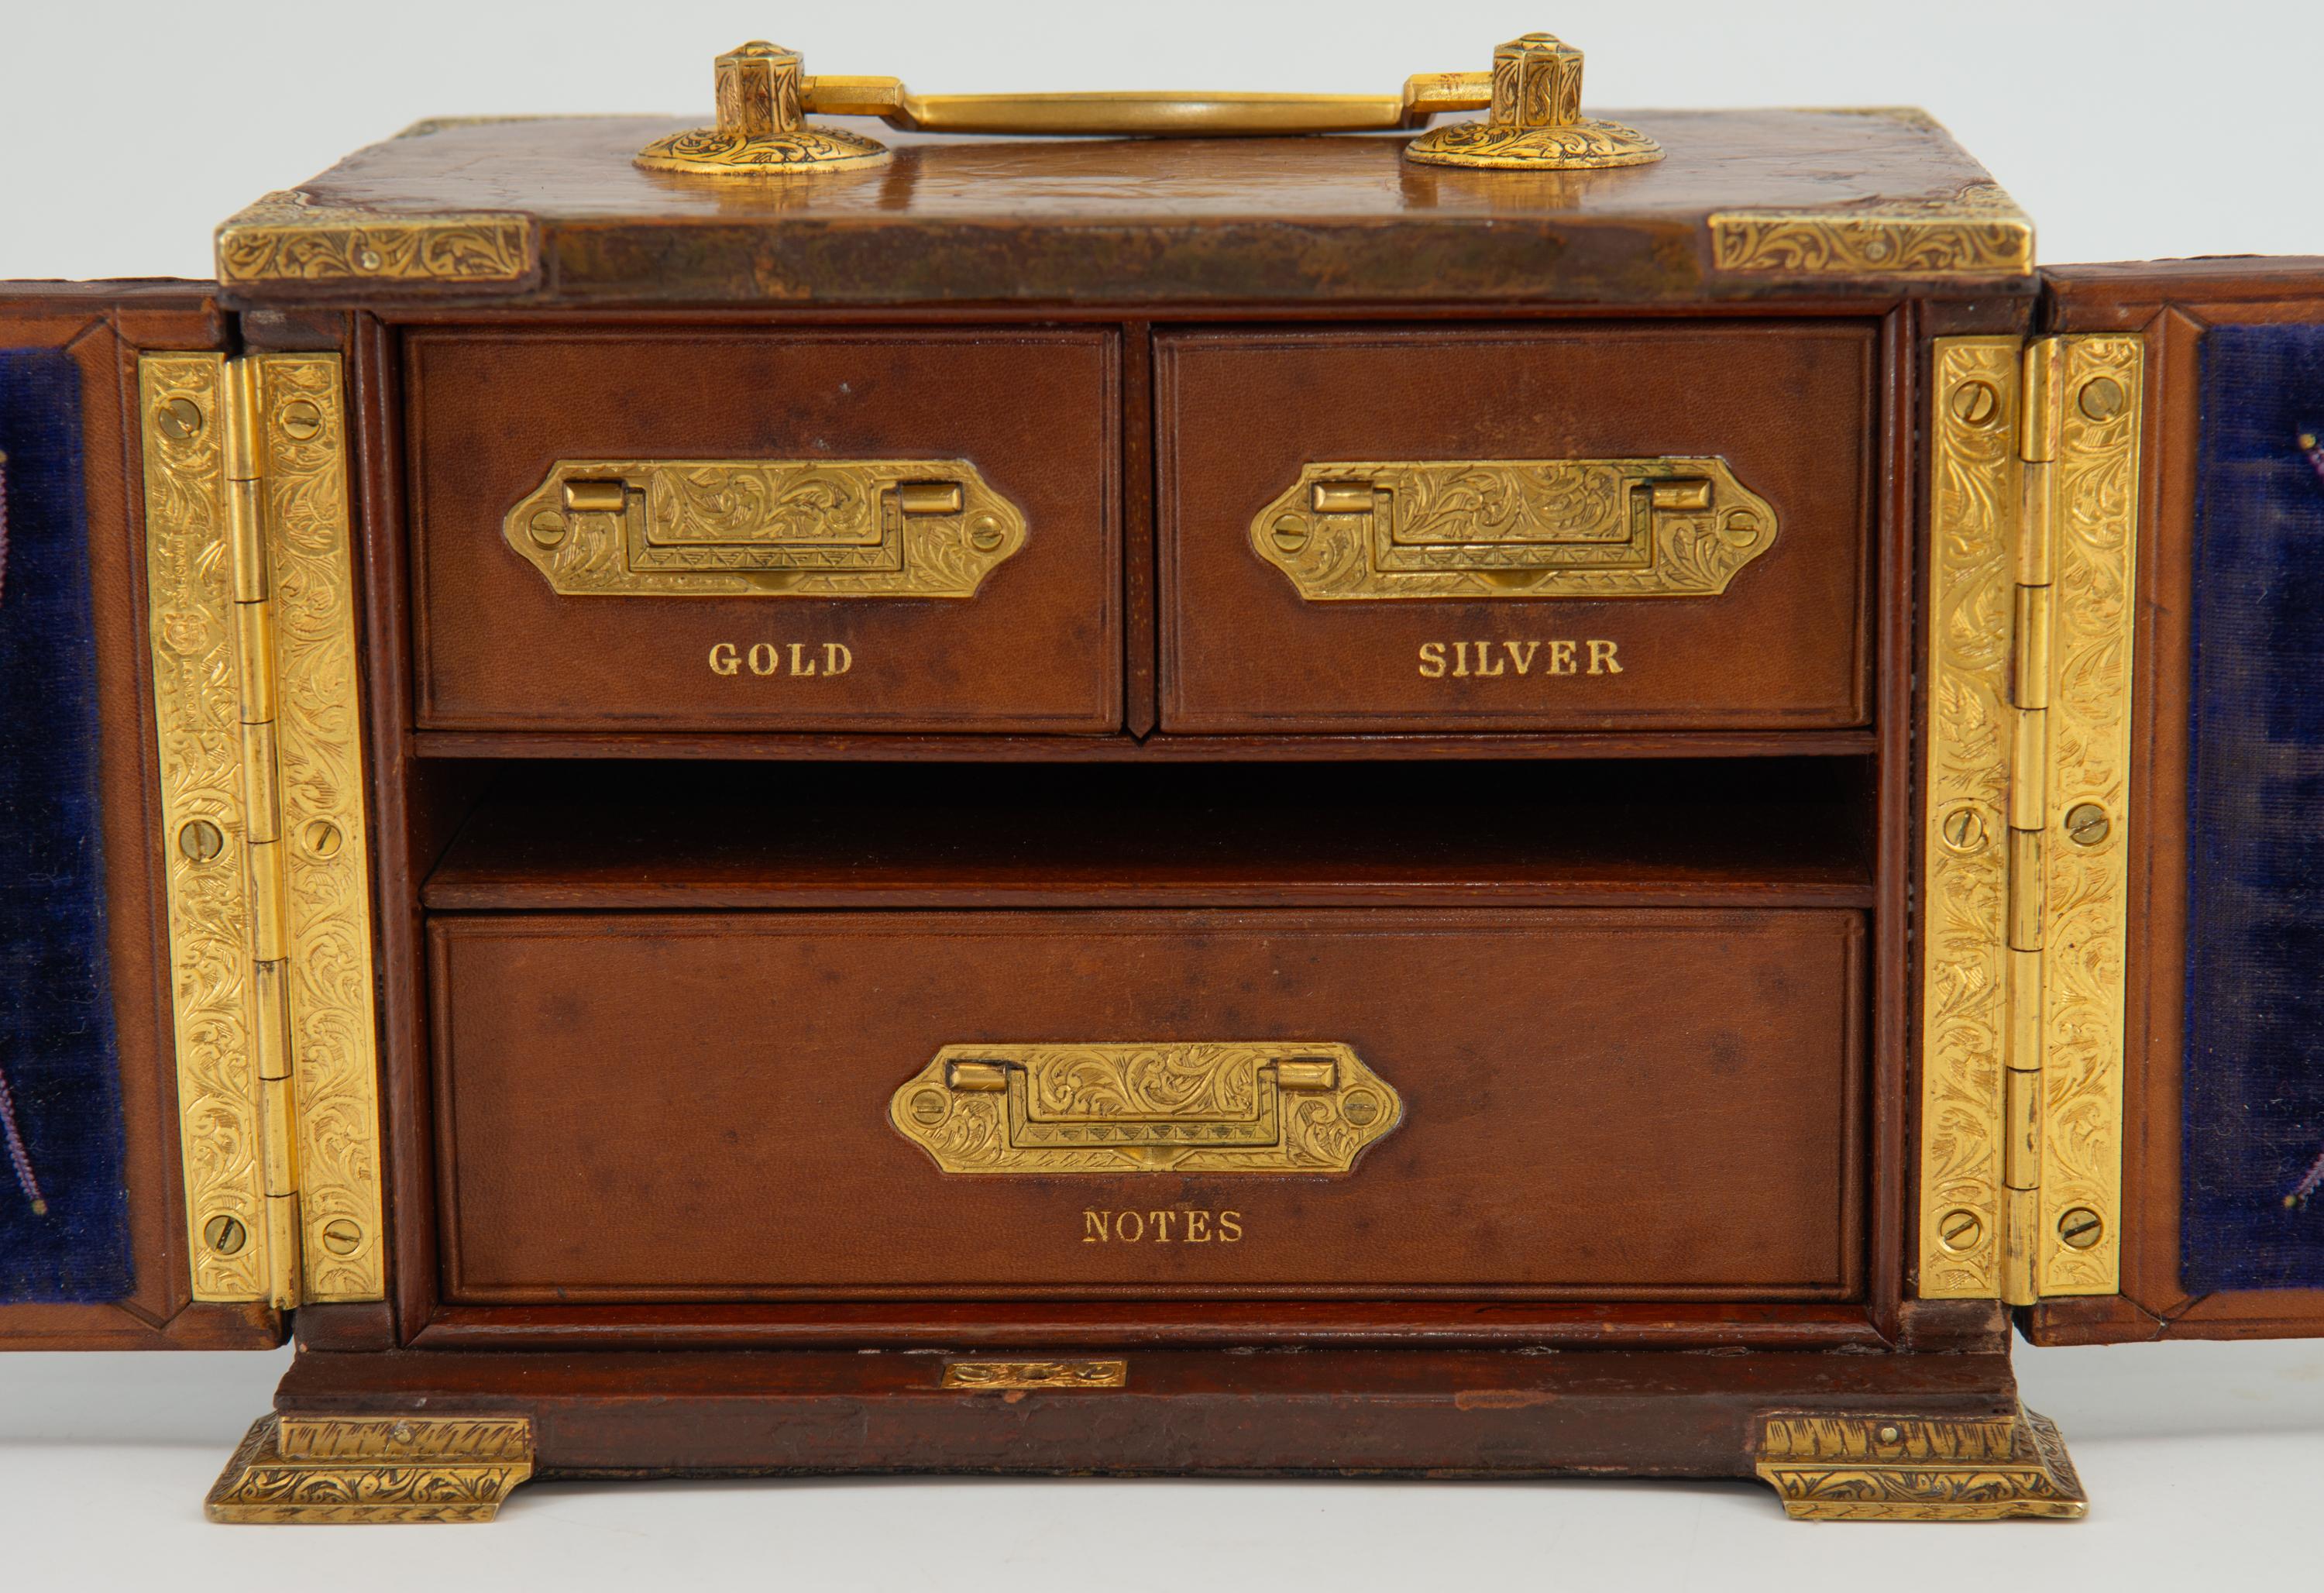 A lovely antique English leather desk top travelling chest with decorative gilt metal mounts to both the exterior and the interior. Bramah lock and key. Circa 1880. 

Delivery included to the UK.

The interior has leather front drawers embossed in